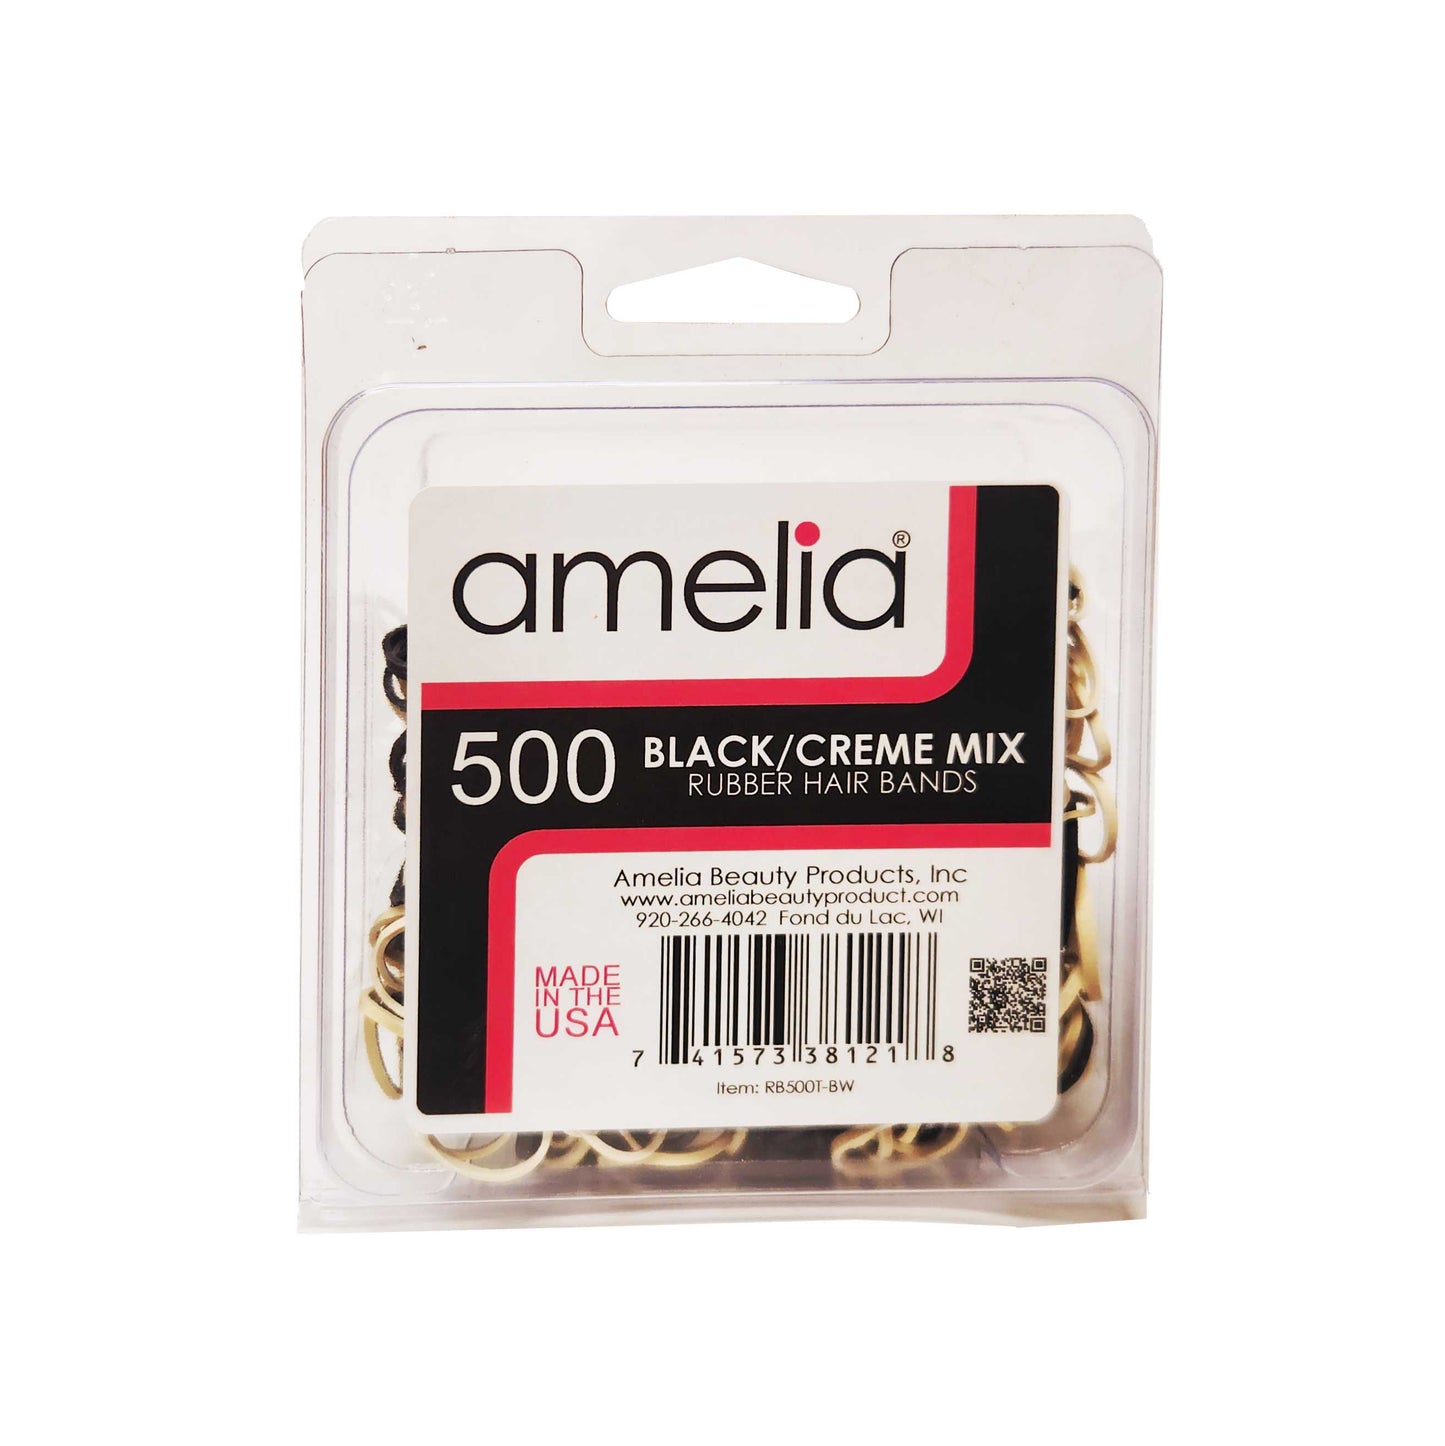 Amelia Beauty | 1/2in, Black and Creme Mix, Elastic Rubber Band Pony Tail Holders | Made in USA, Ideal for Ponytails, Braids, Twists, Dreadlocks, Styling Accessories for Women, Men and Girls | 500 Pack